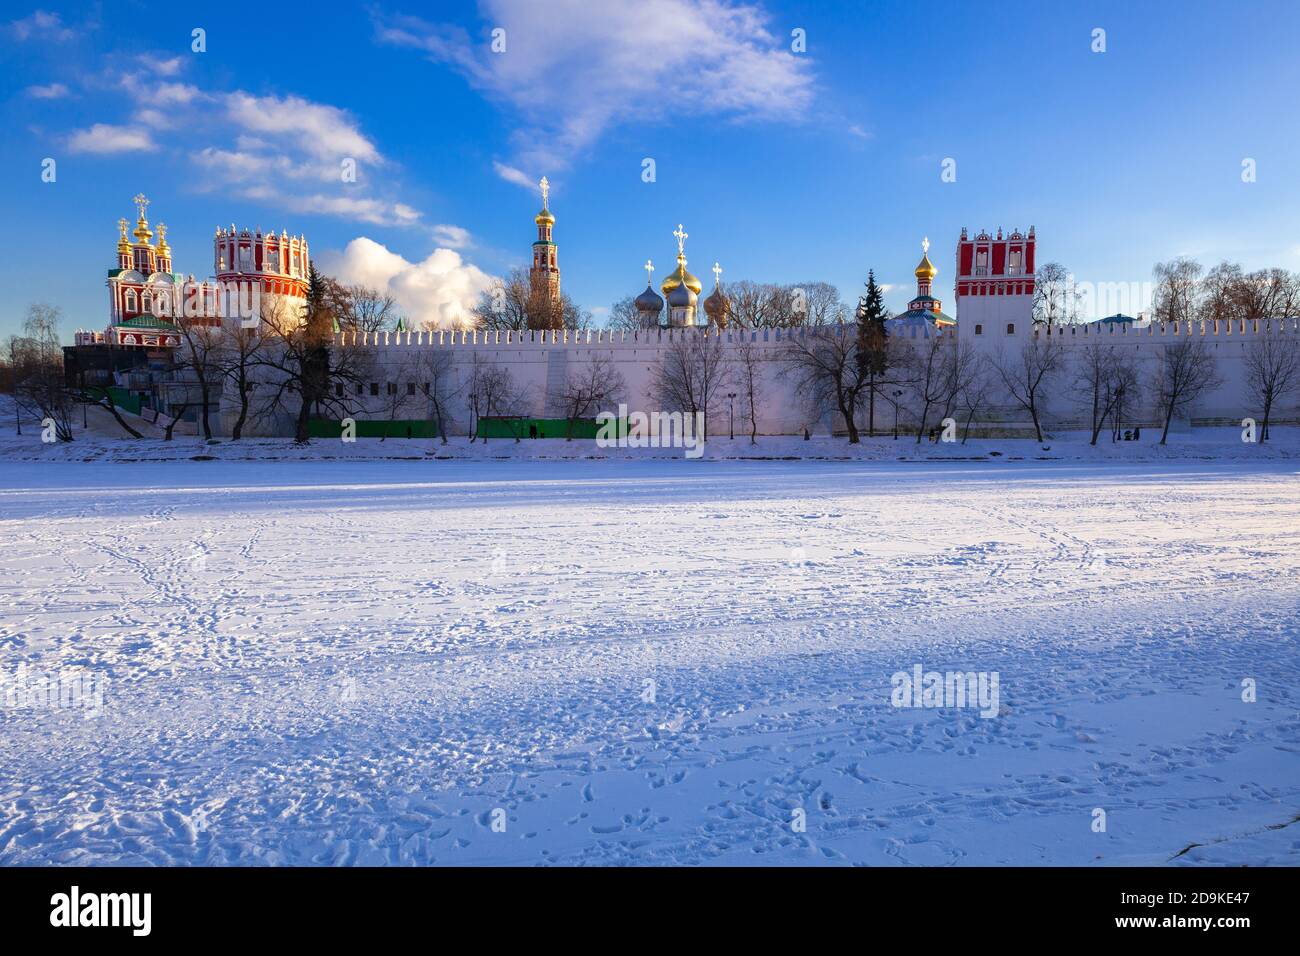 A view of the Novodevichy Convent in winter, UNESCO heritage site, Moscow, Russia Stock Photo